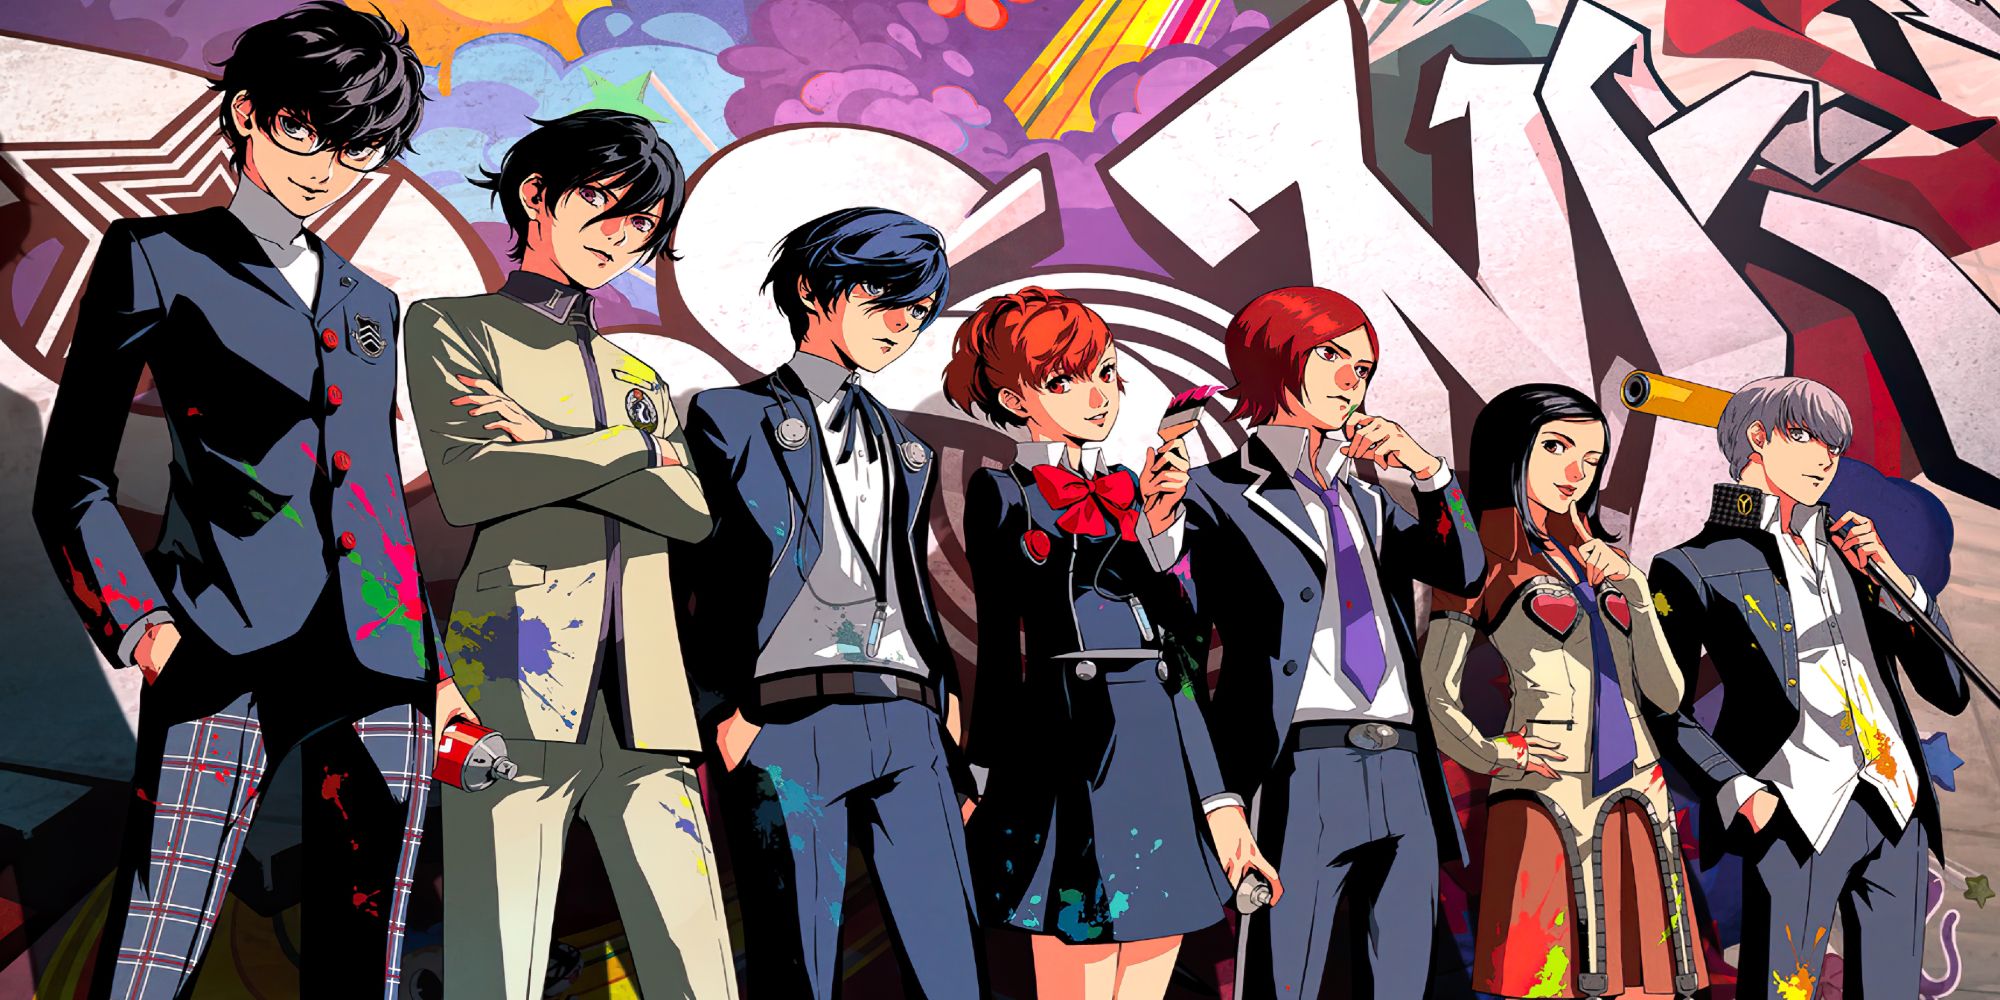 Persona characters stood in a line in front of a wall covered in graffiti